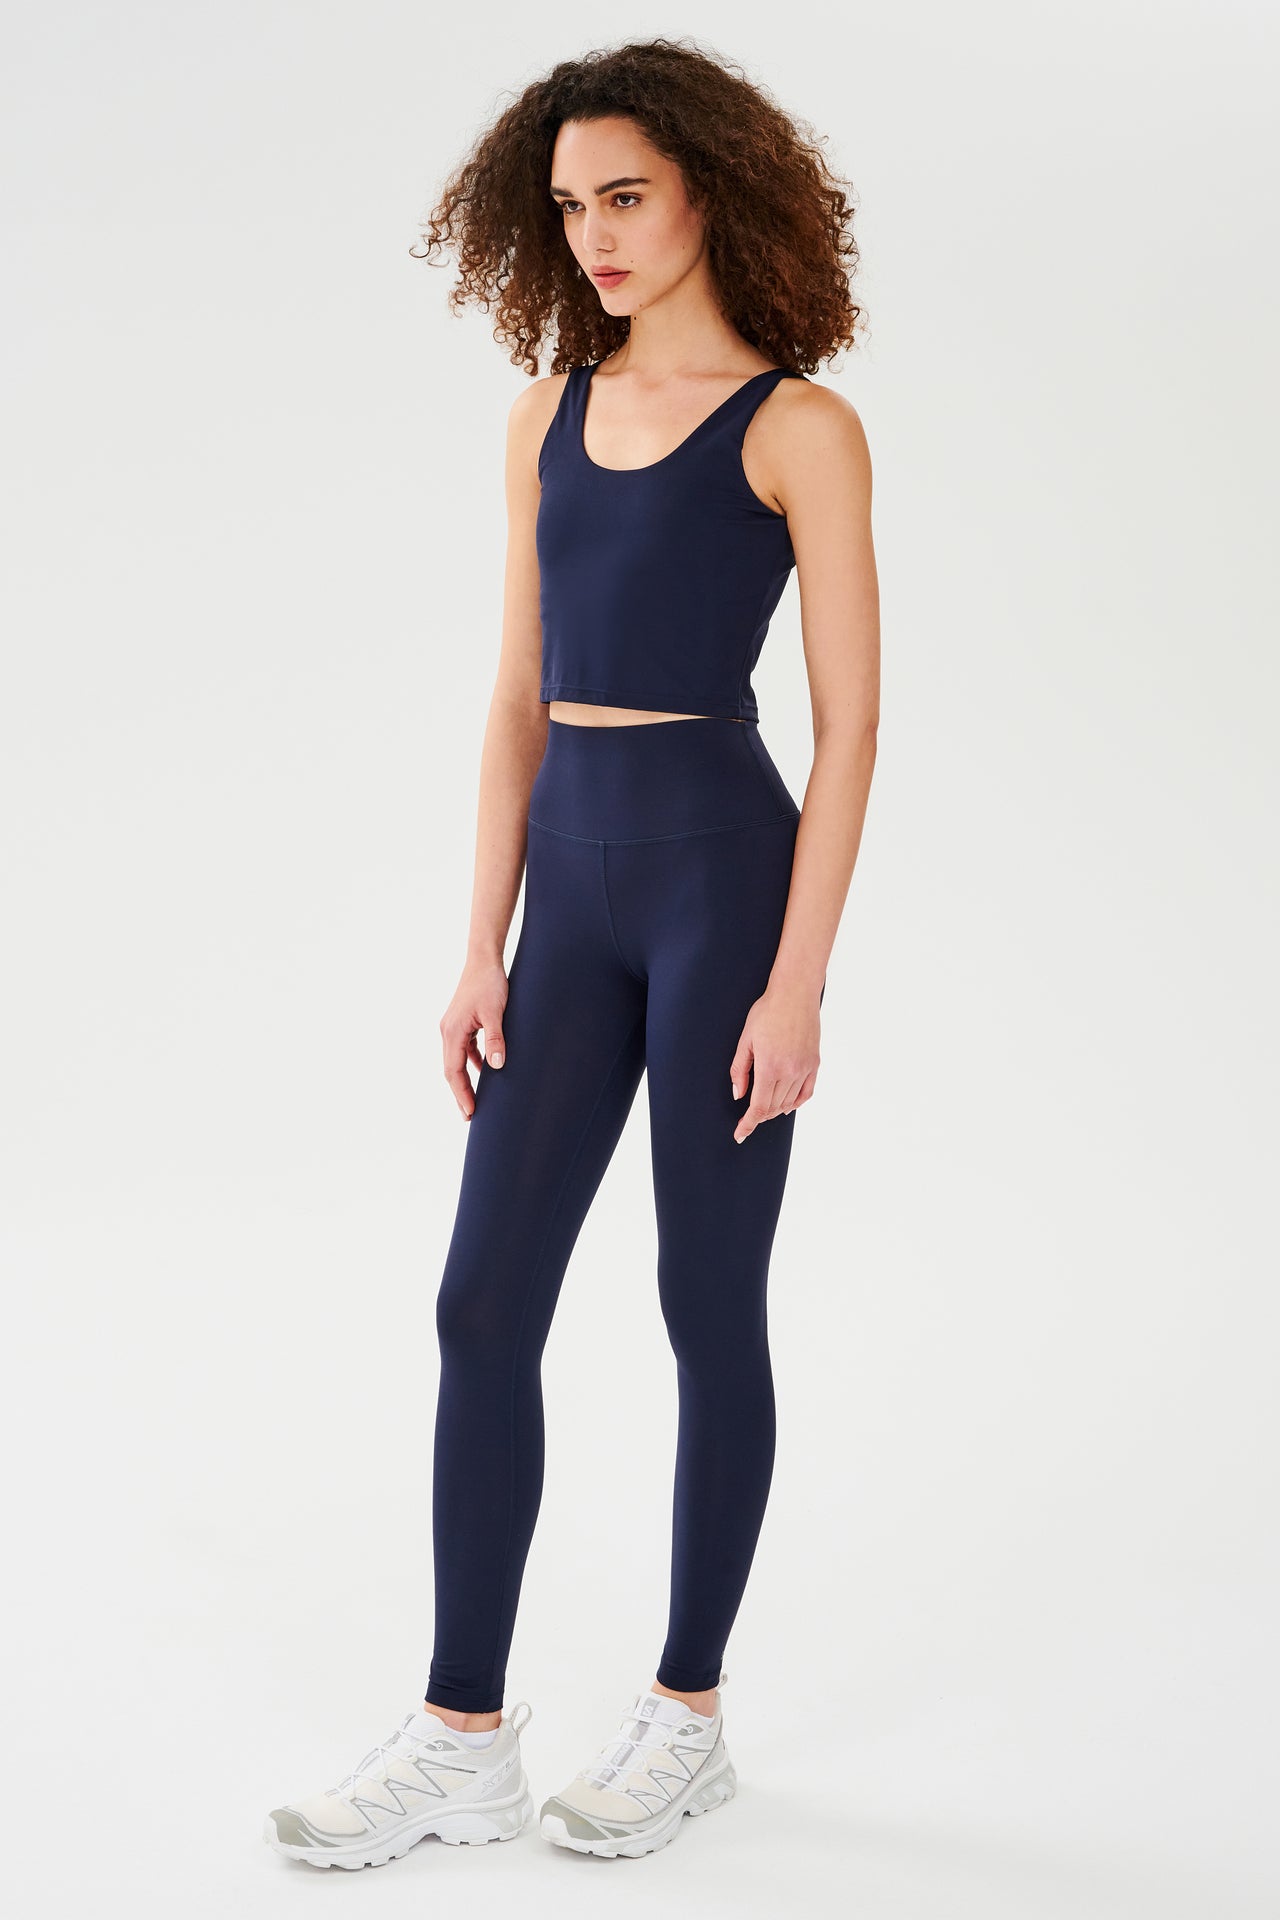 Front full side view of woman with dark curly hair wearing dark blue high waist  leggings and dark blue bra tank paired with white shoes 